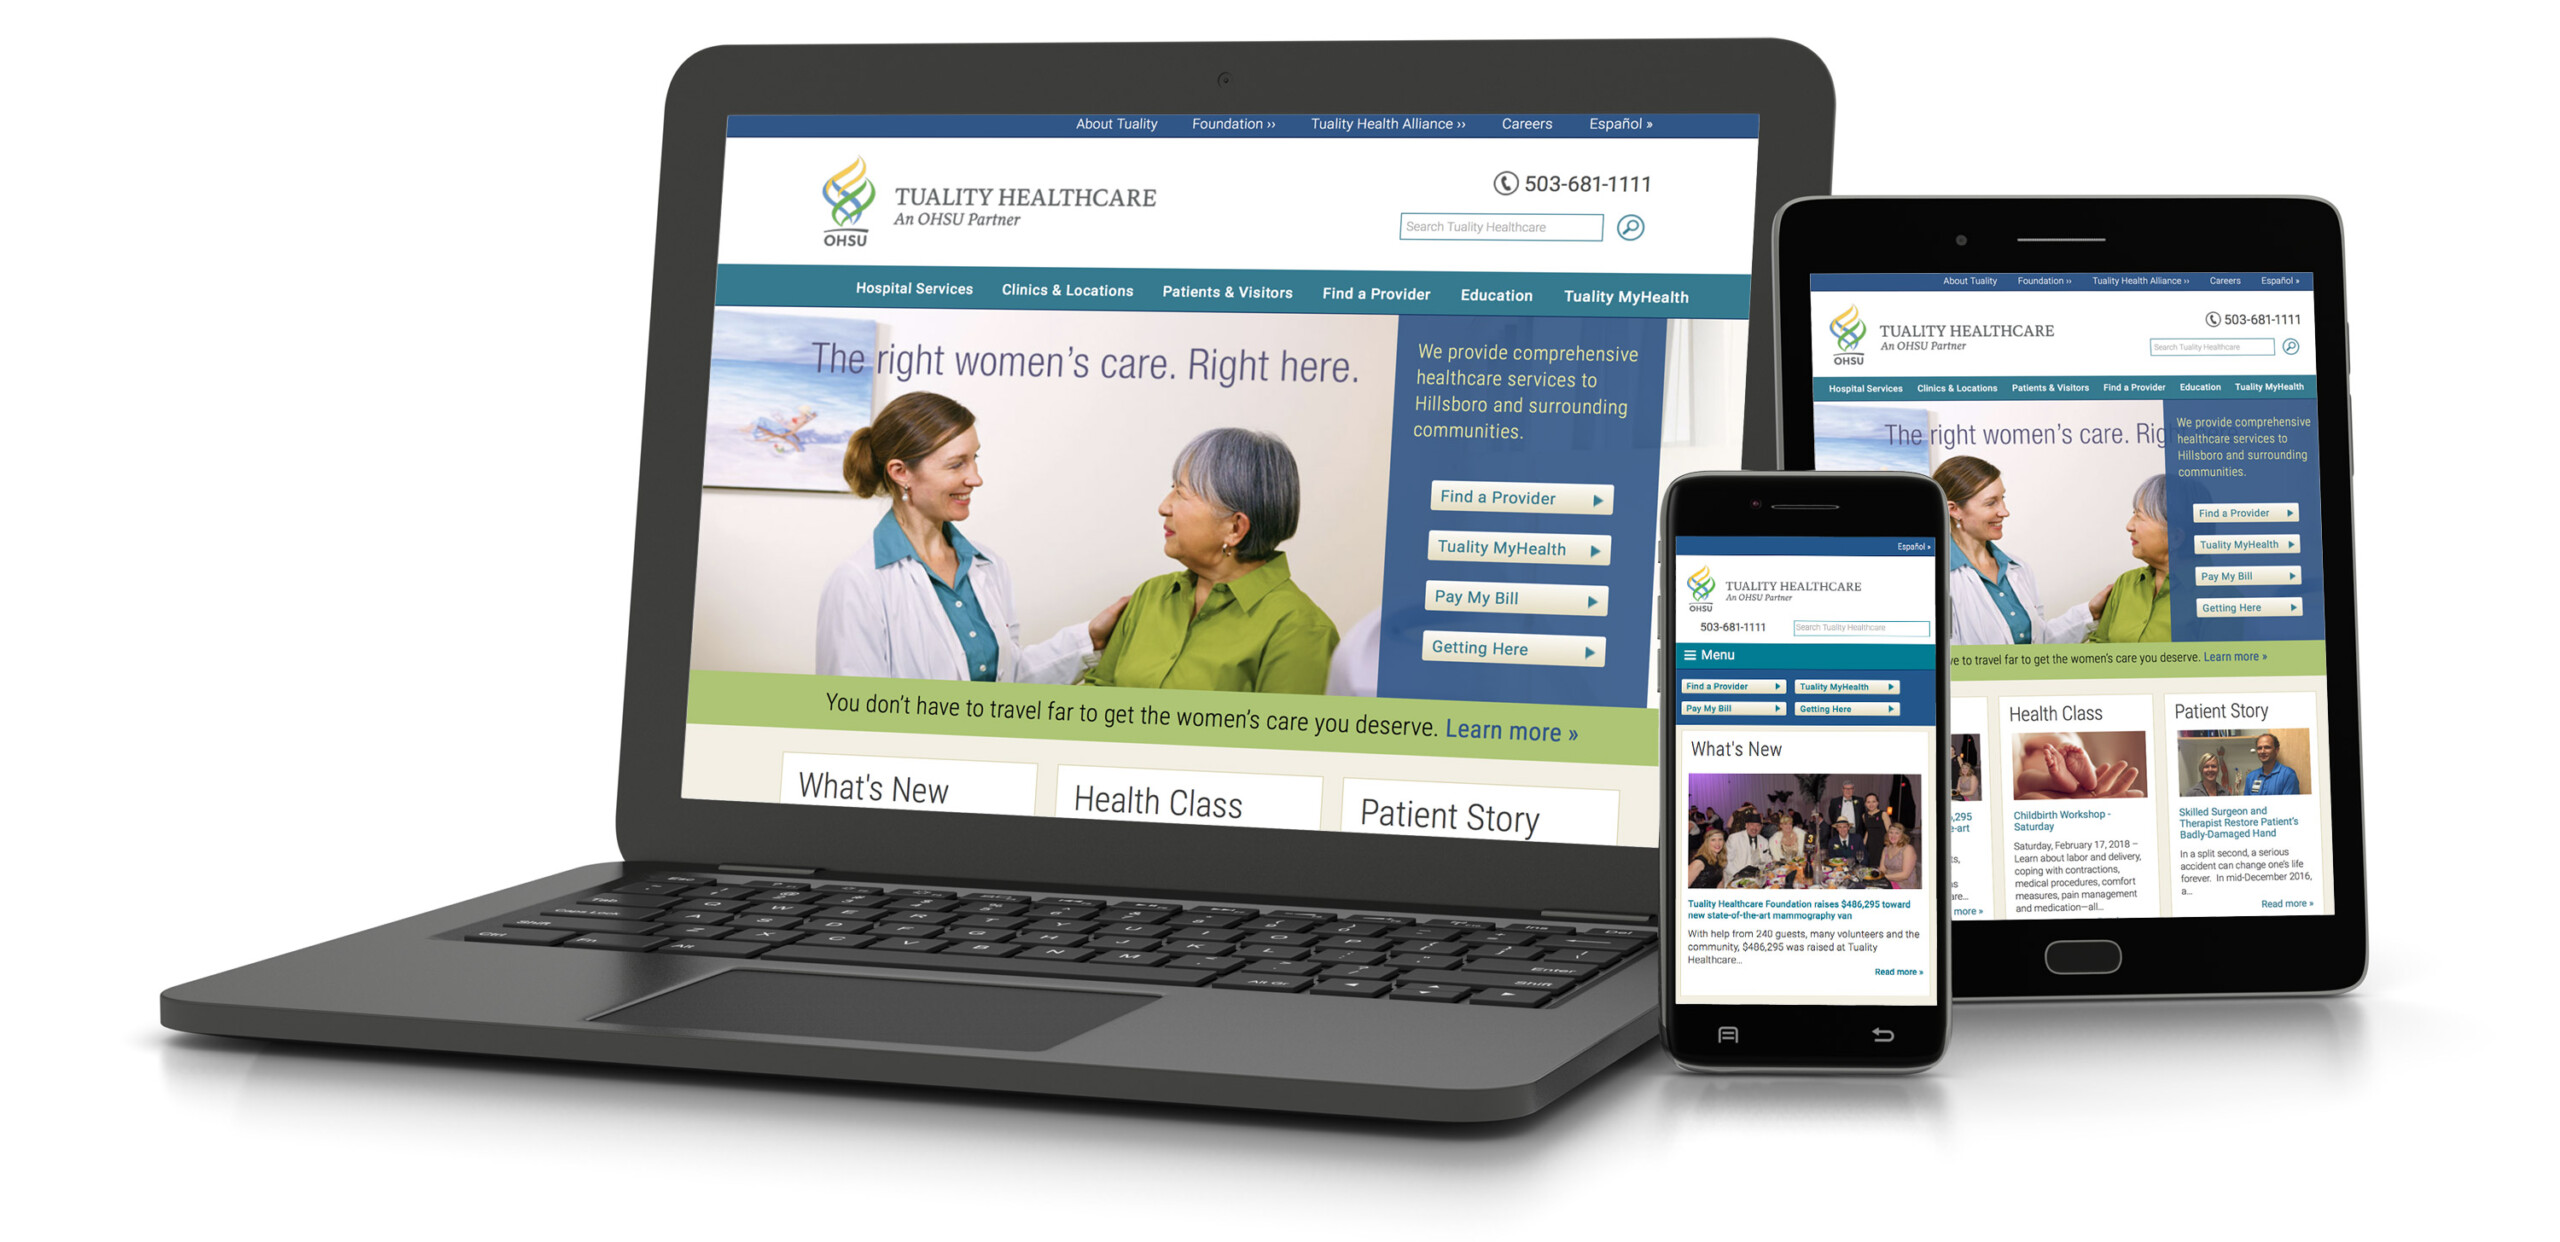 Tuality Healthcare website redesigned to be responsive across multiple platforms